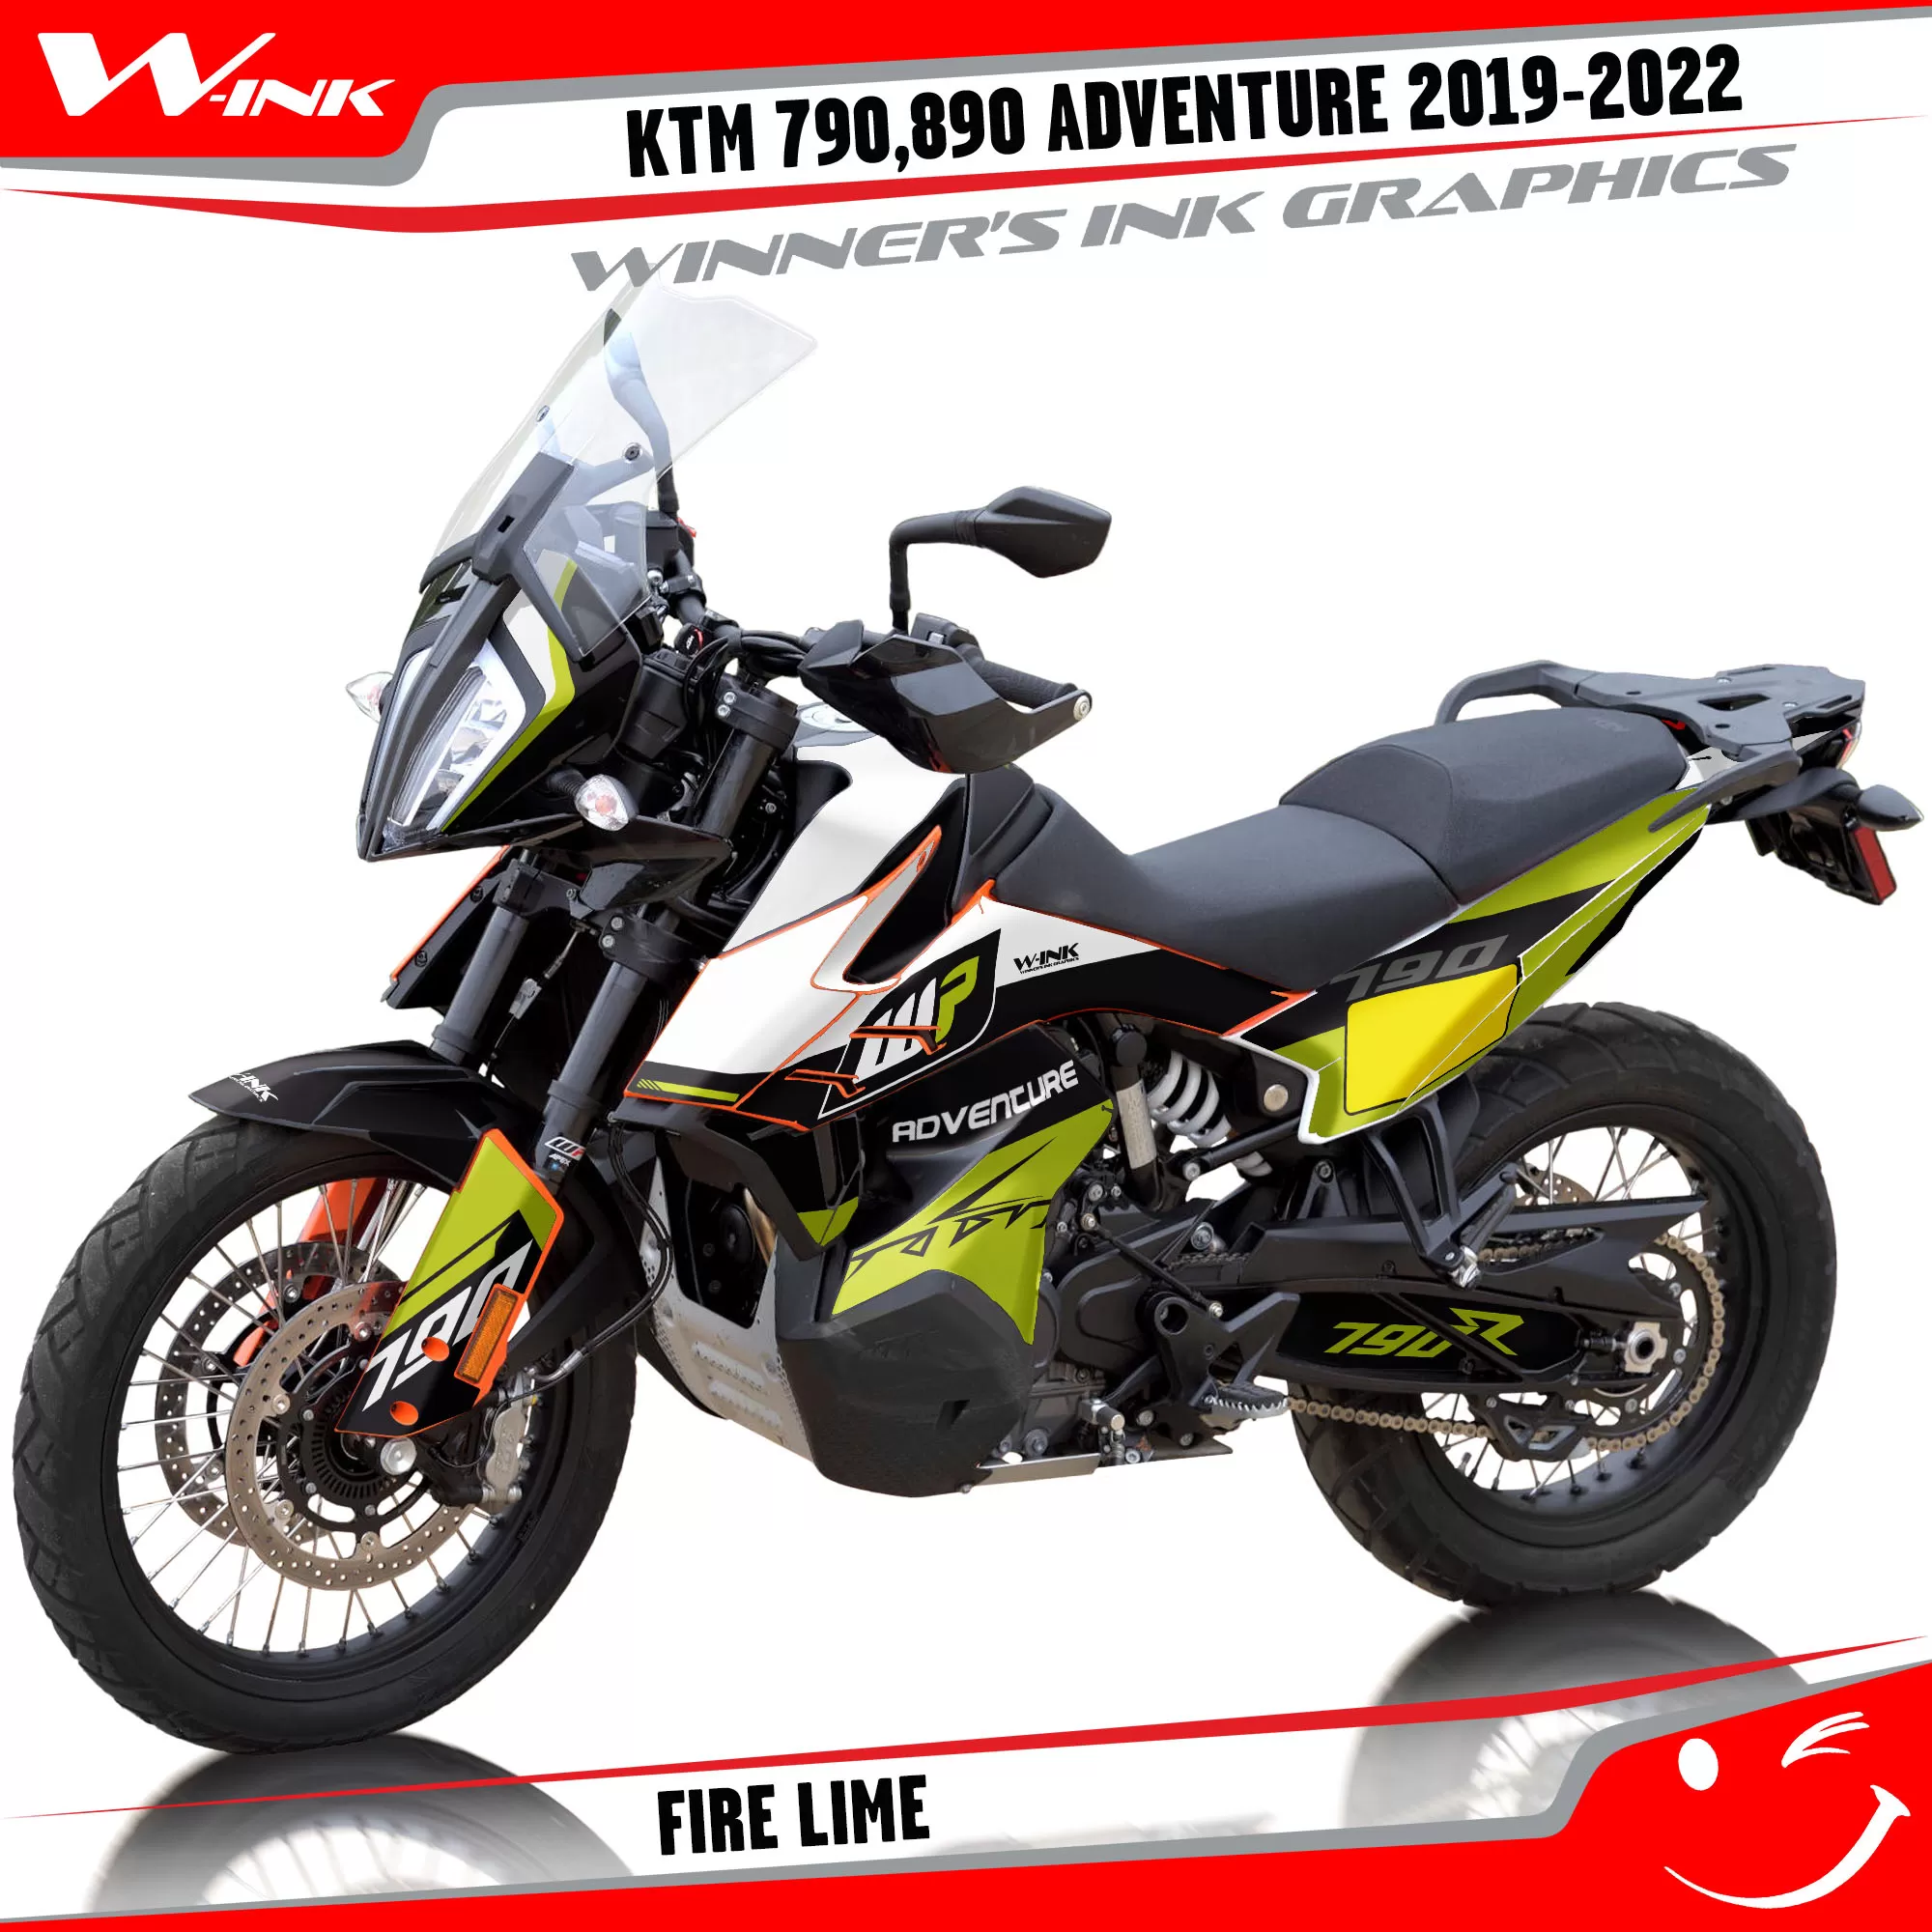 Adventure-790-890-2019-2020-2021-2022-graphics-kit-and-decals-with-designs-Fire-Lime